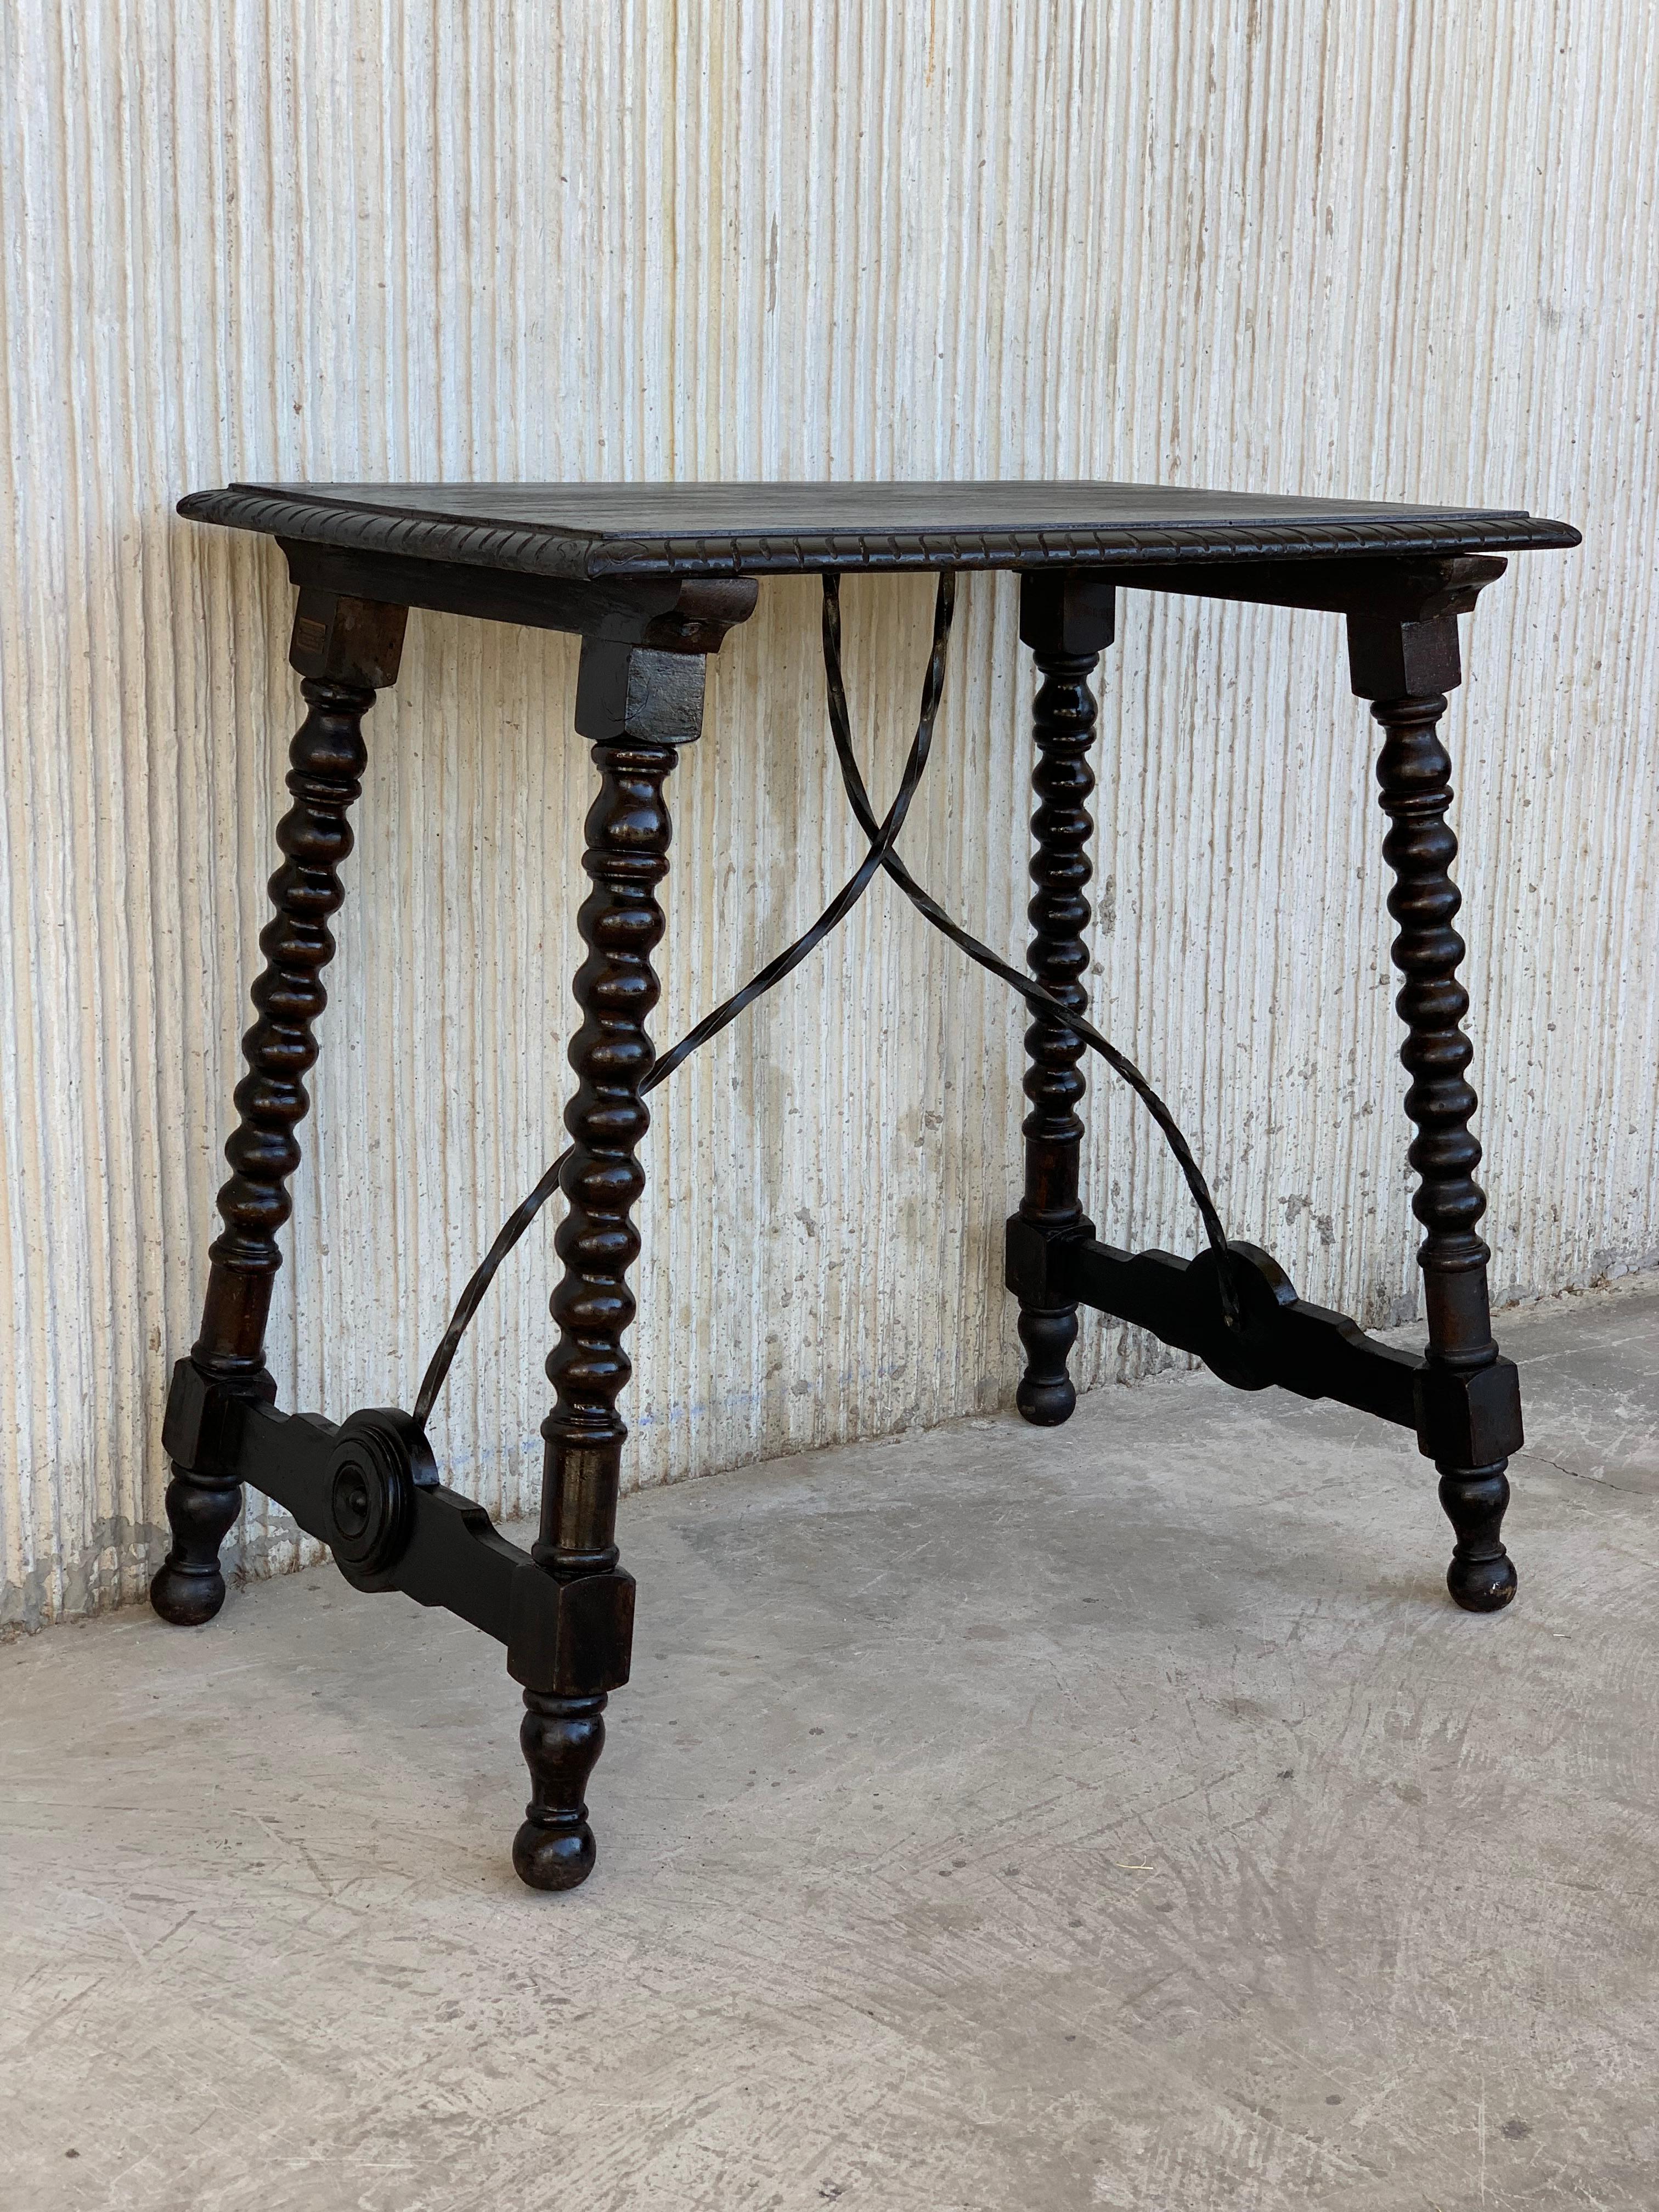 20th century Spanish Baroque ebonized side table with iron stretcher and carved top in walnut.